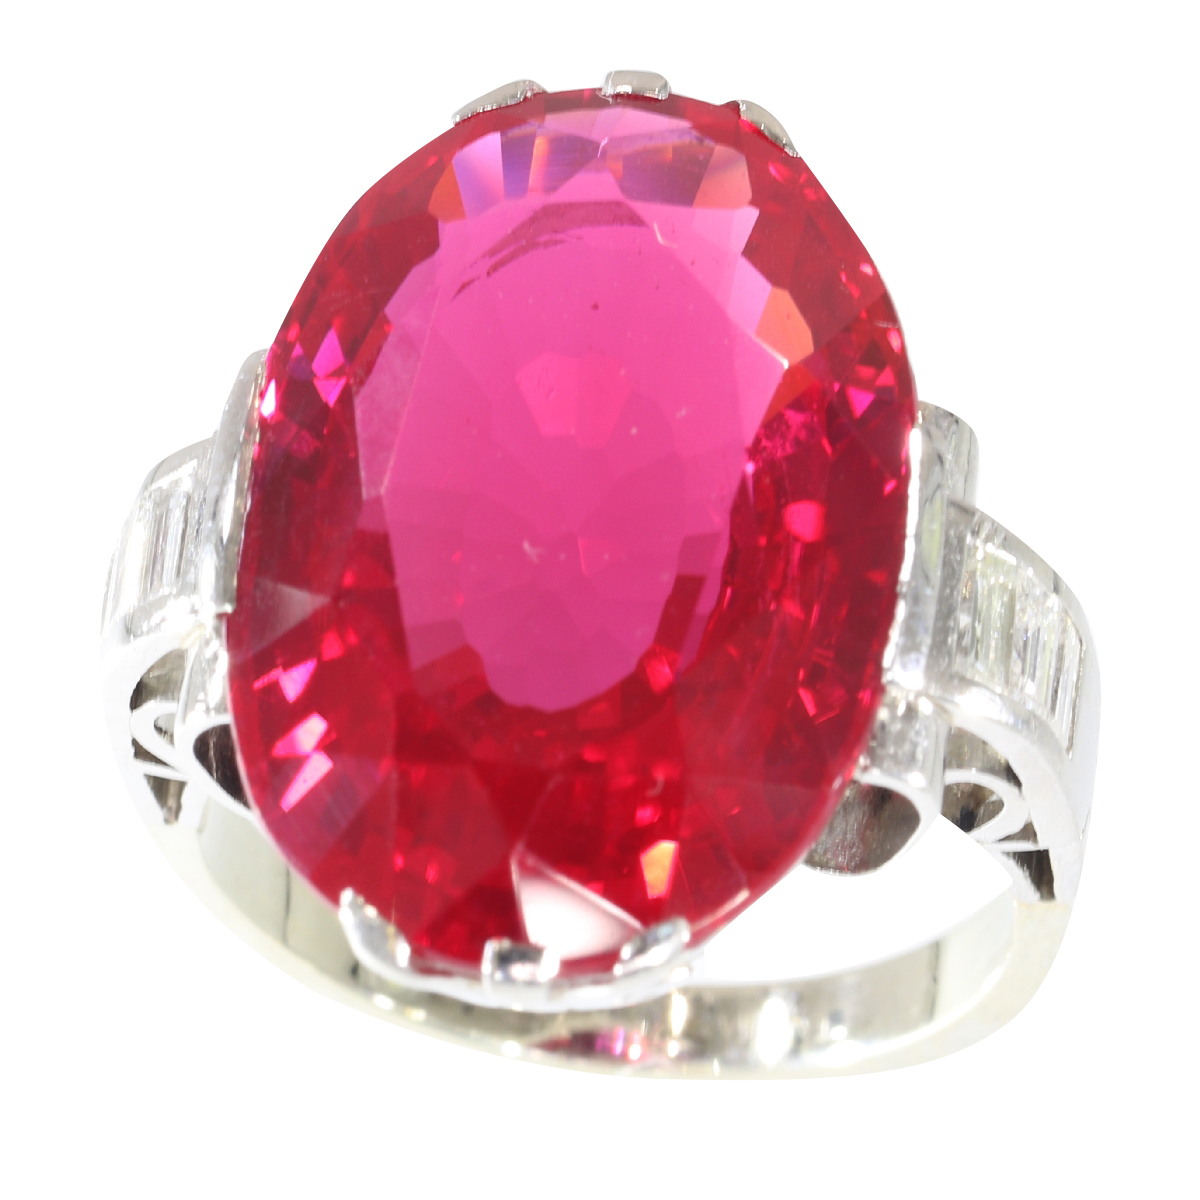 Ruby Radiance: A French Art Deco Engagement Ring